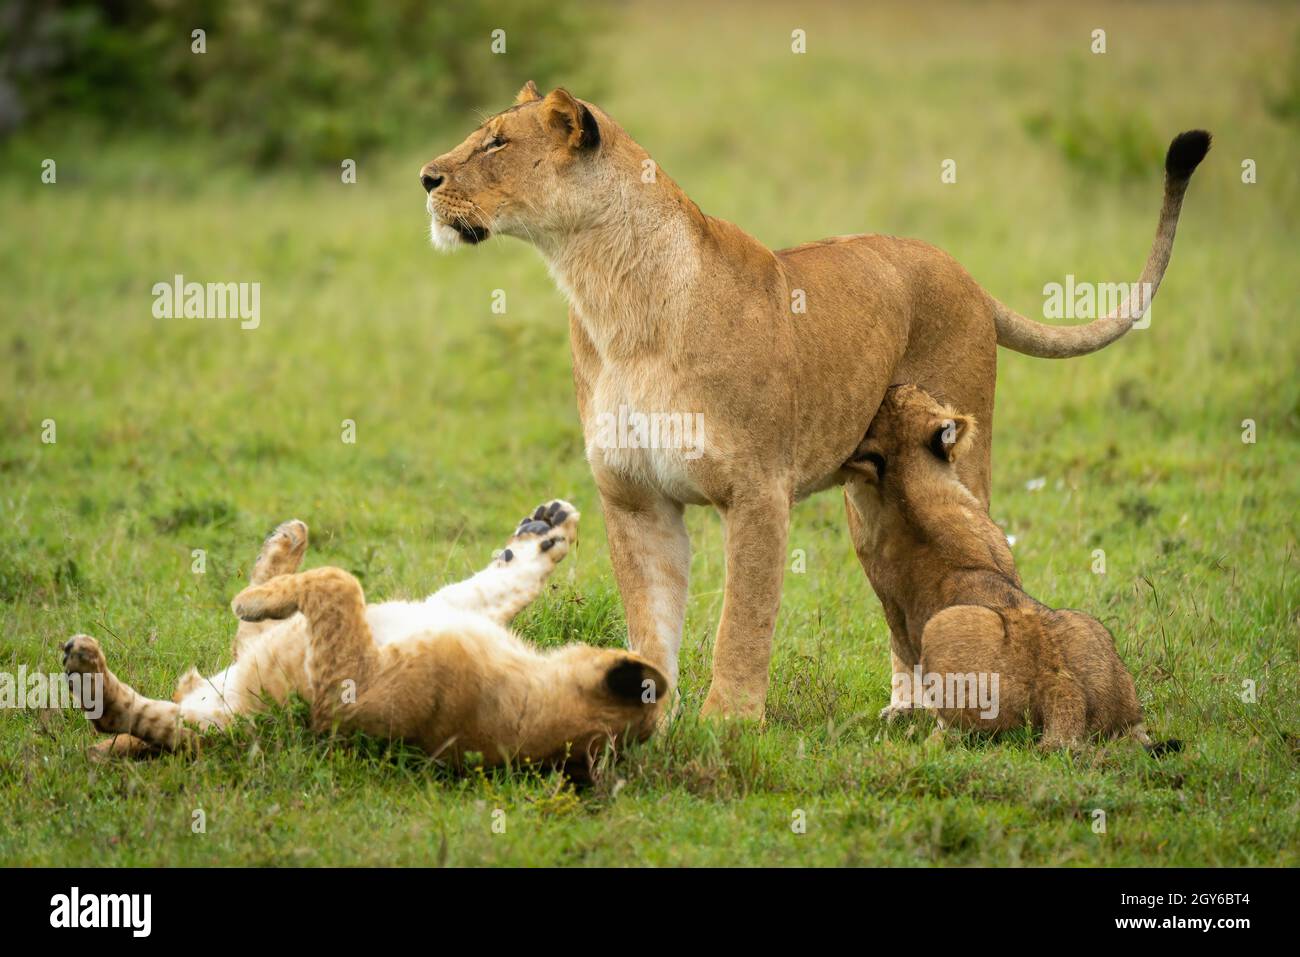 Lioness stands by playful cubs in grass Stock Photo